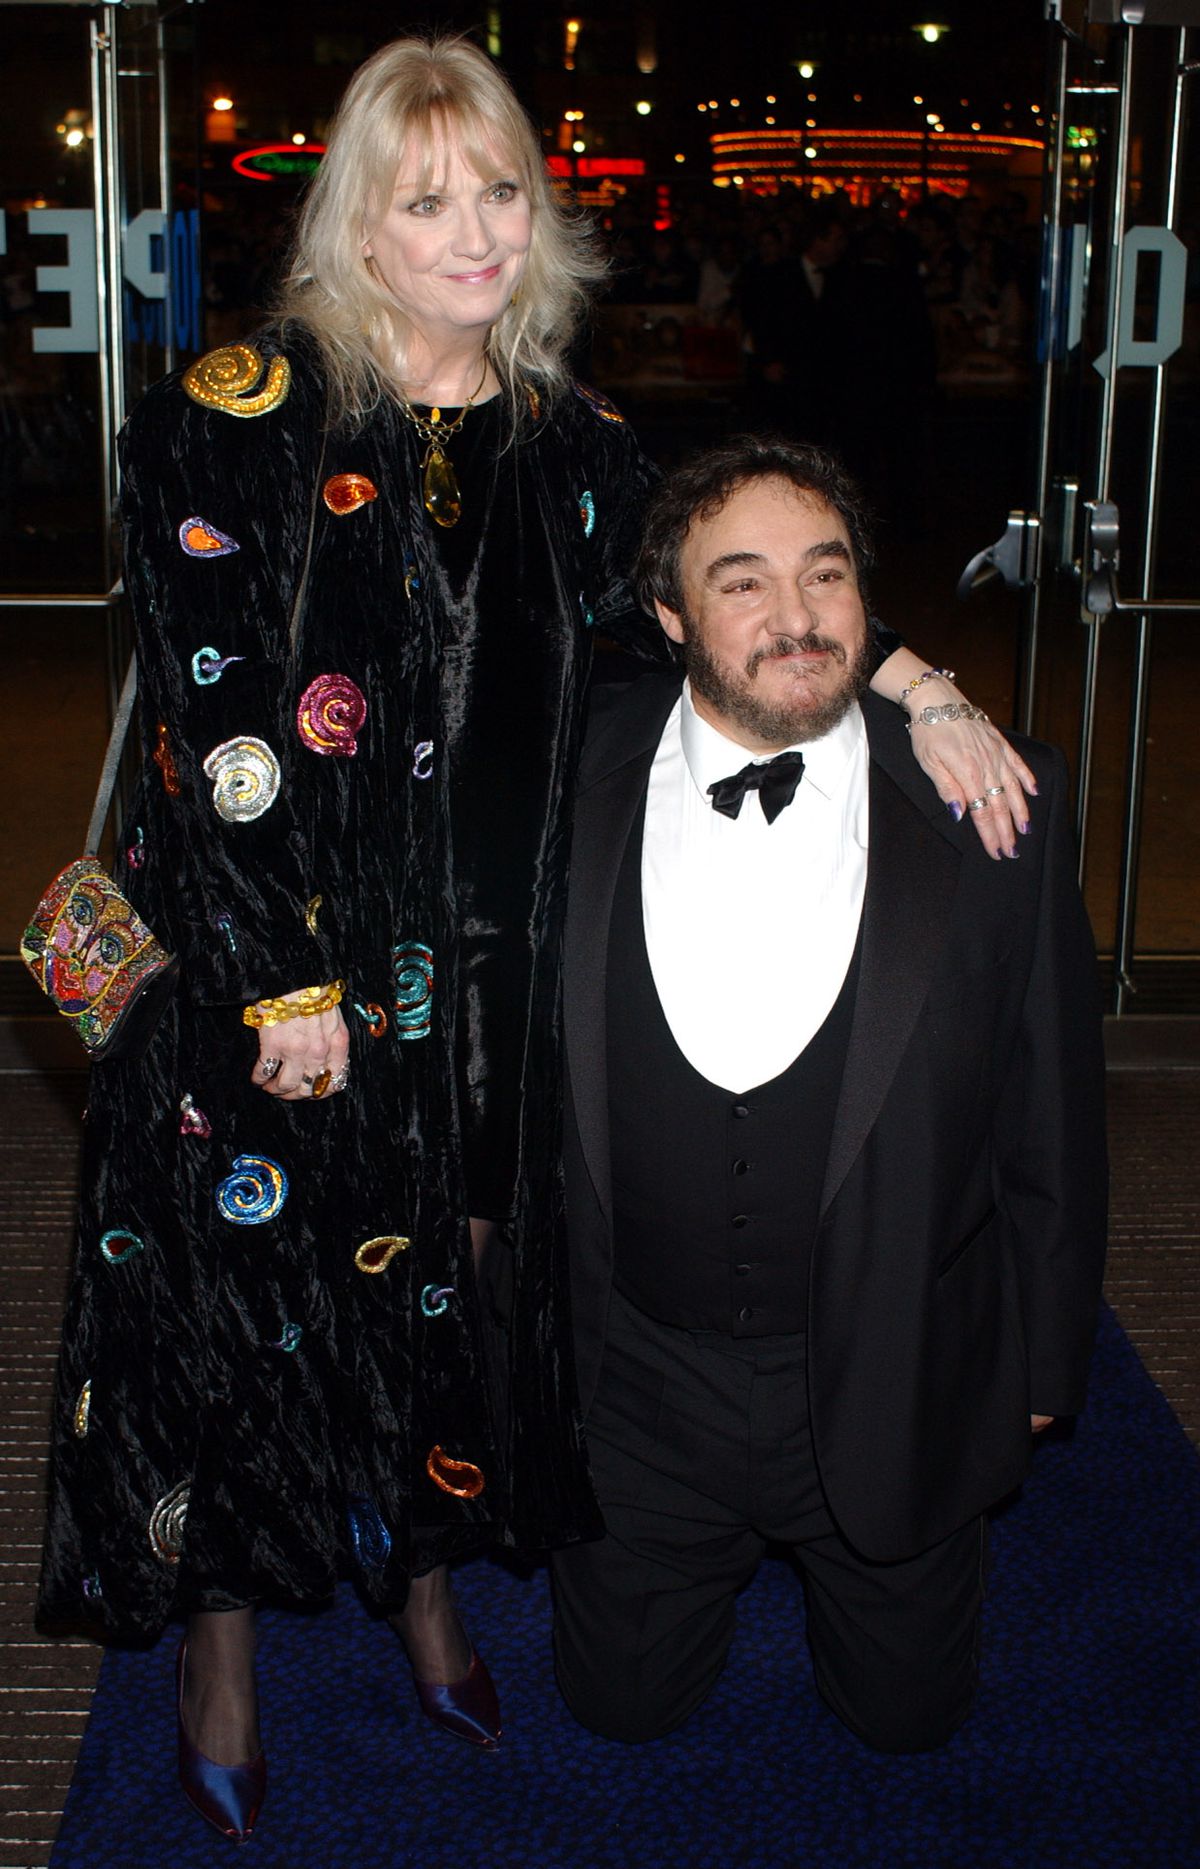 John Rhys-Davies kneels next to a blonde woman at the Lord of the Rings: The Fellowship of the Ring premiere in London